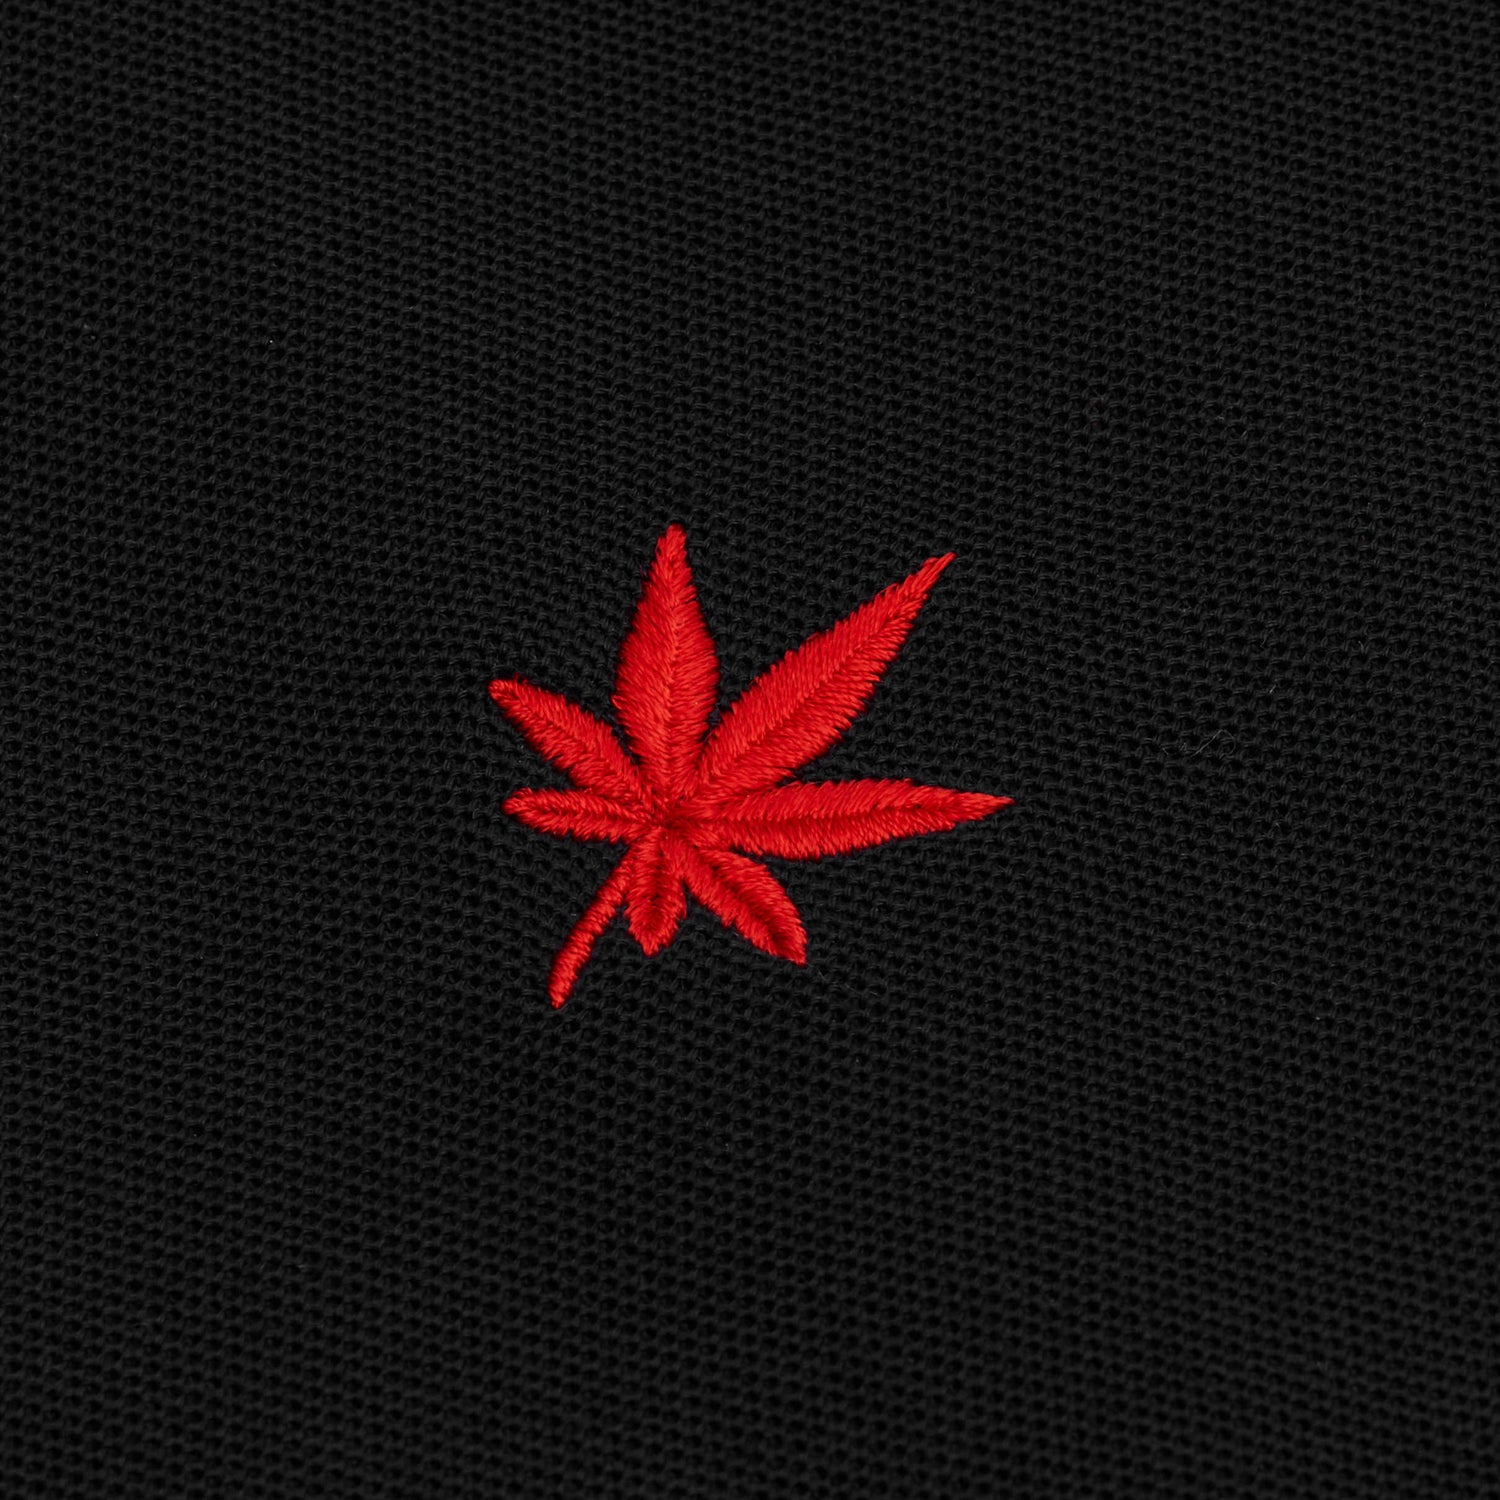 Red embroidered leaf.